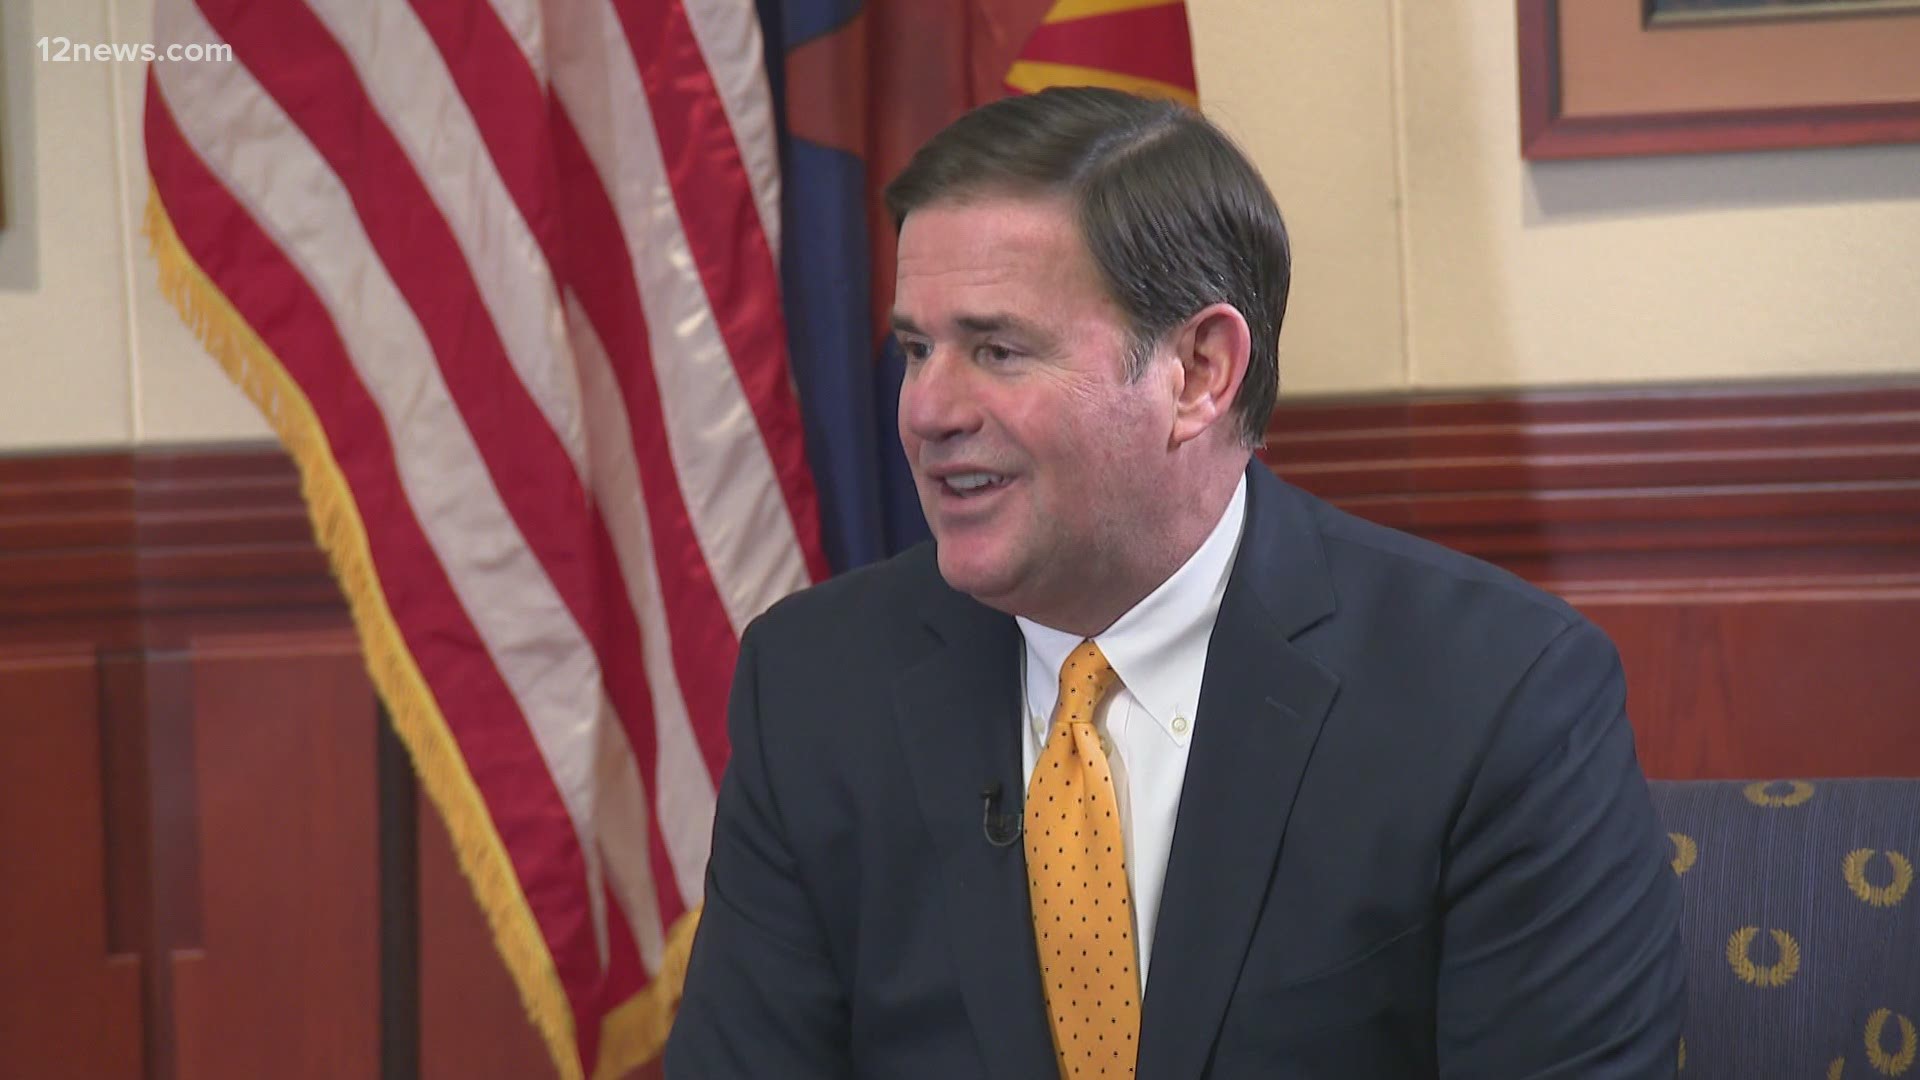 In a one-on-one interview with Team 12's Mark Curtis, Arizona's Governor Doug Ducey addresses the COVID-19 vaccine rollout in the state.